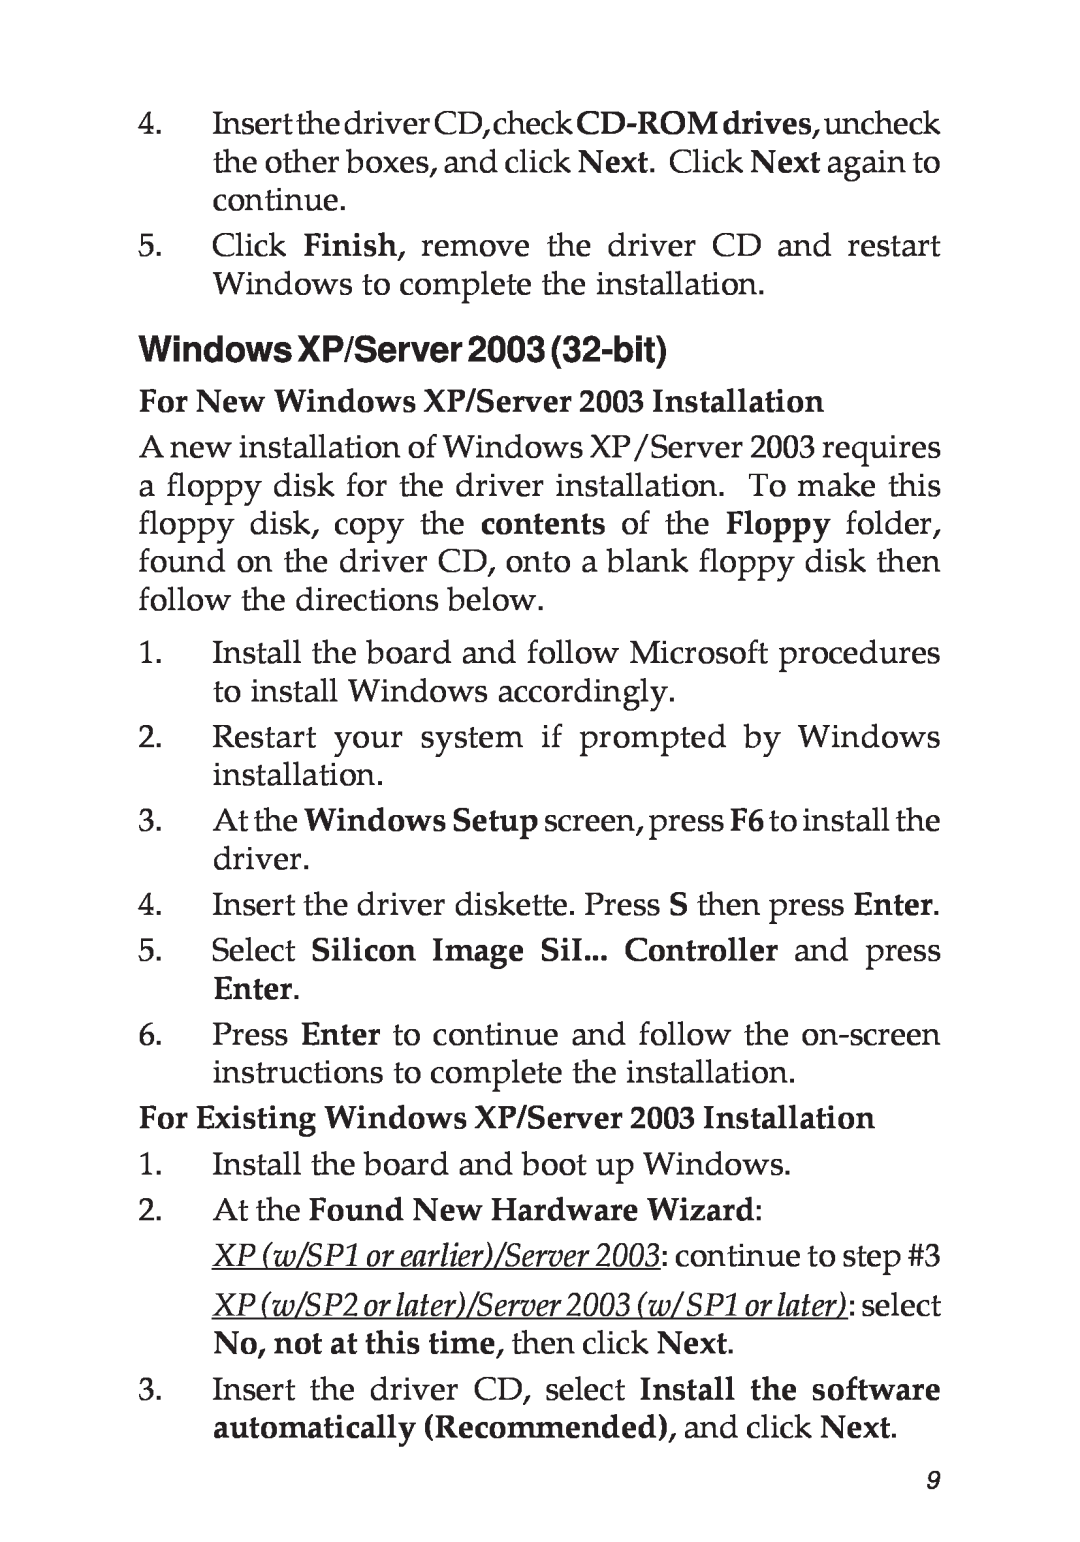 SIIG 04-0265F specifications Windows XP/Server 2003 32-bit, XP w/SP1 or earlier/Server 2003 continue to step #3 